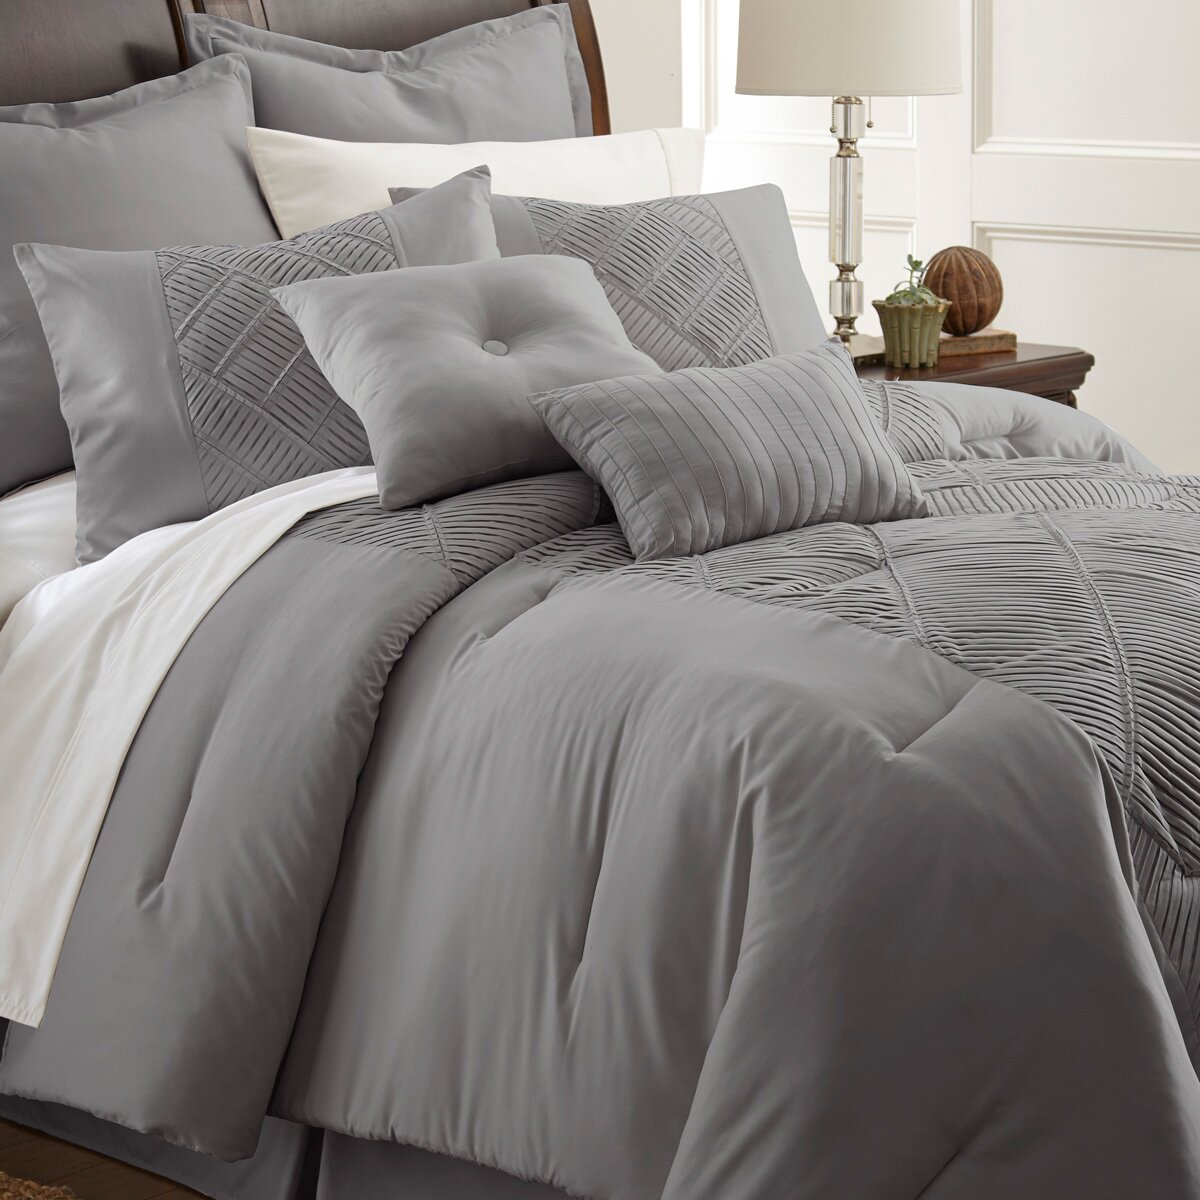 Colonial Textiles Savannah 8 Piece Embellished Comforter Set in Gray ...